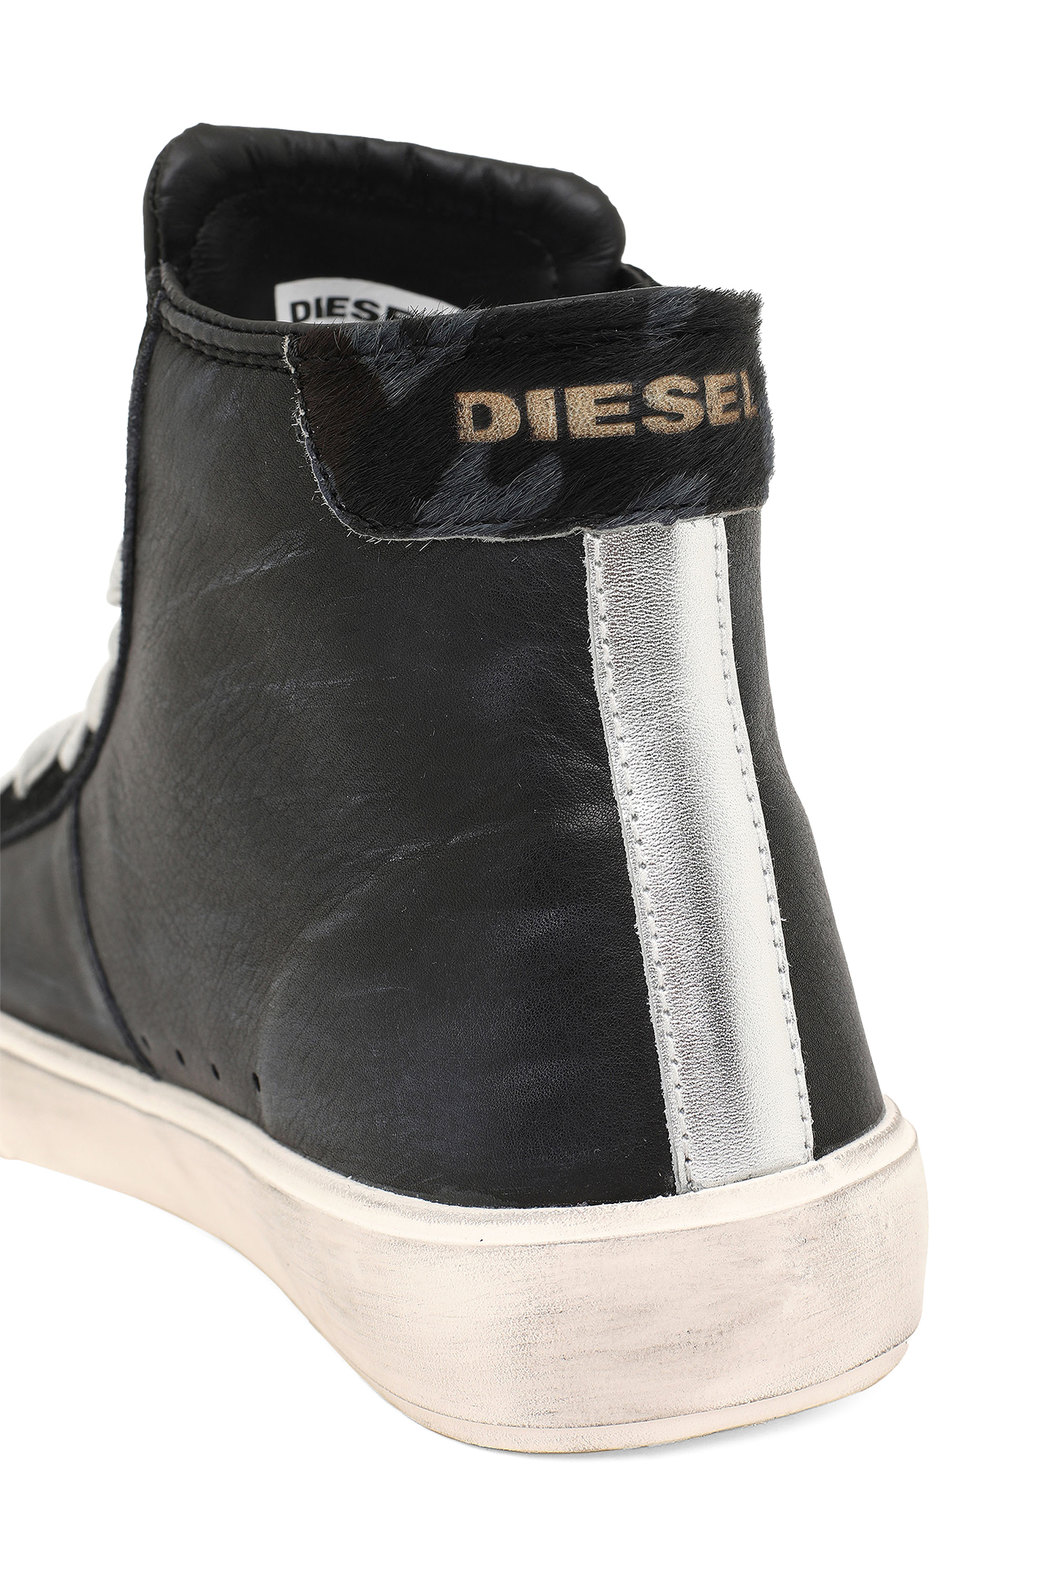 High-top sneakers in treated leather